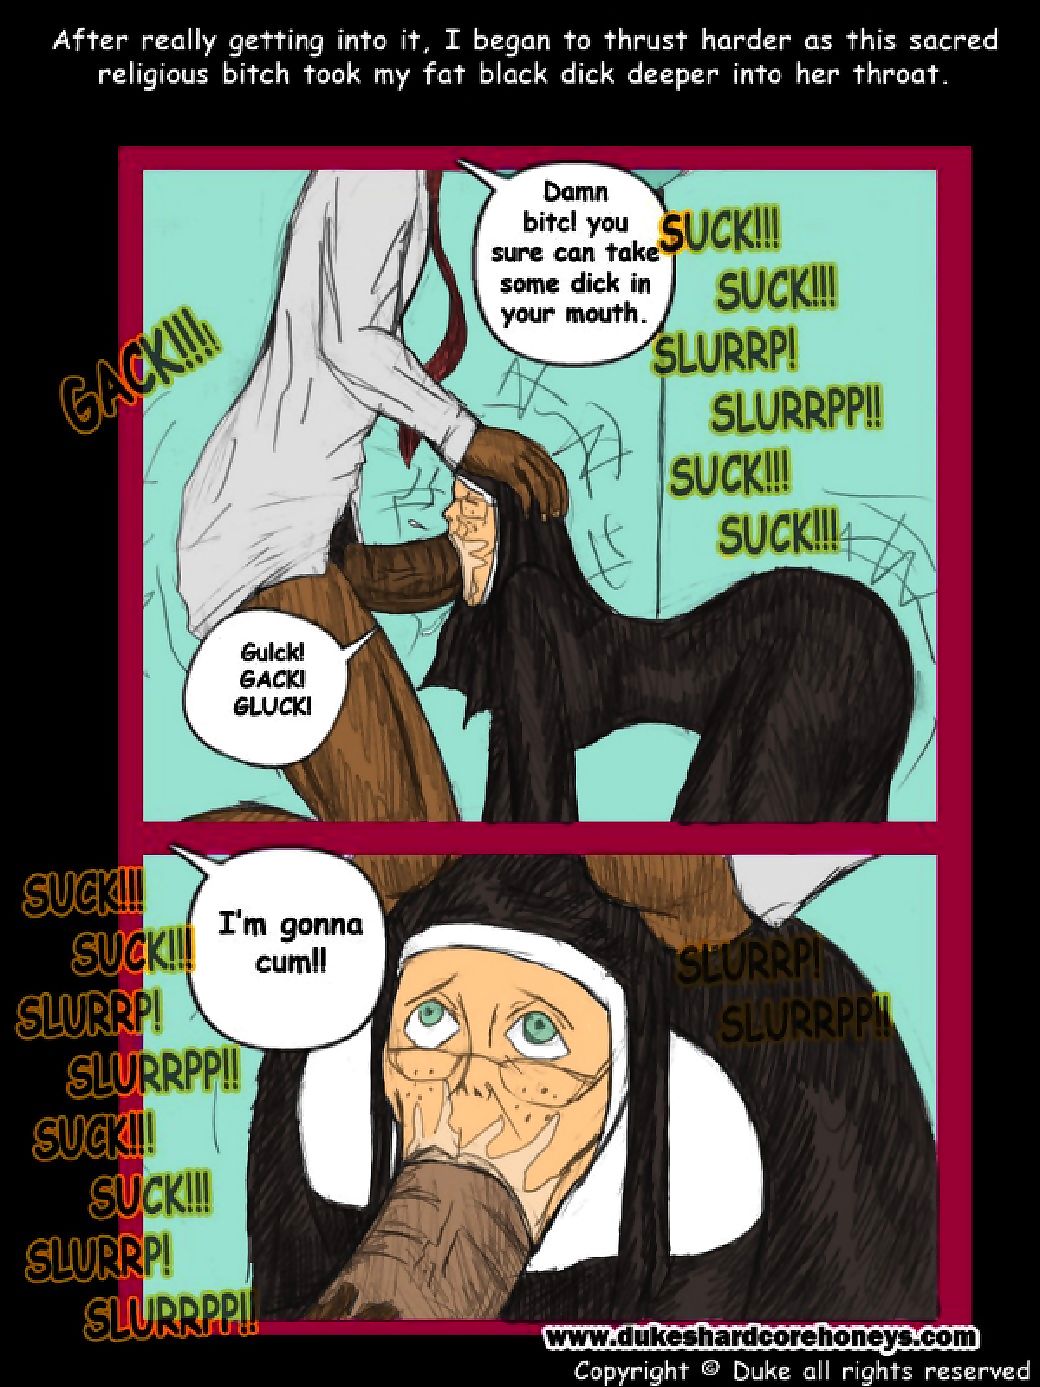 Sister OMalley Part 1- 2- Duke Honey page 1